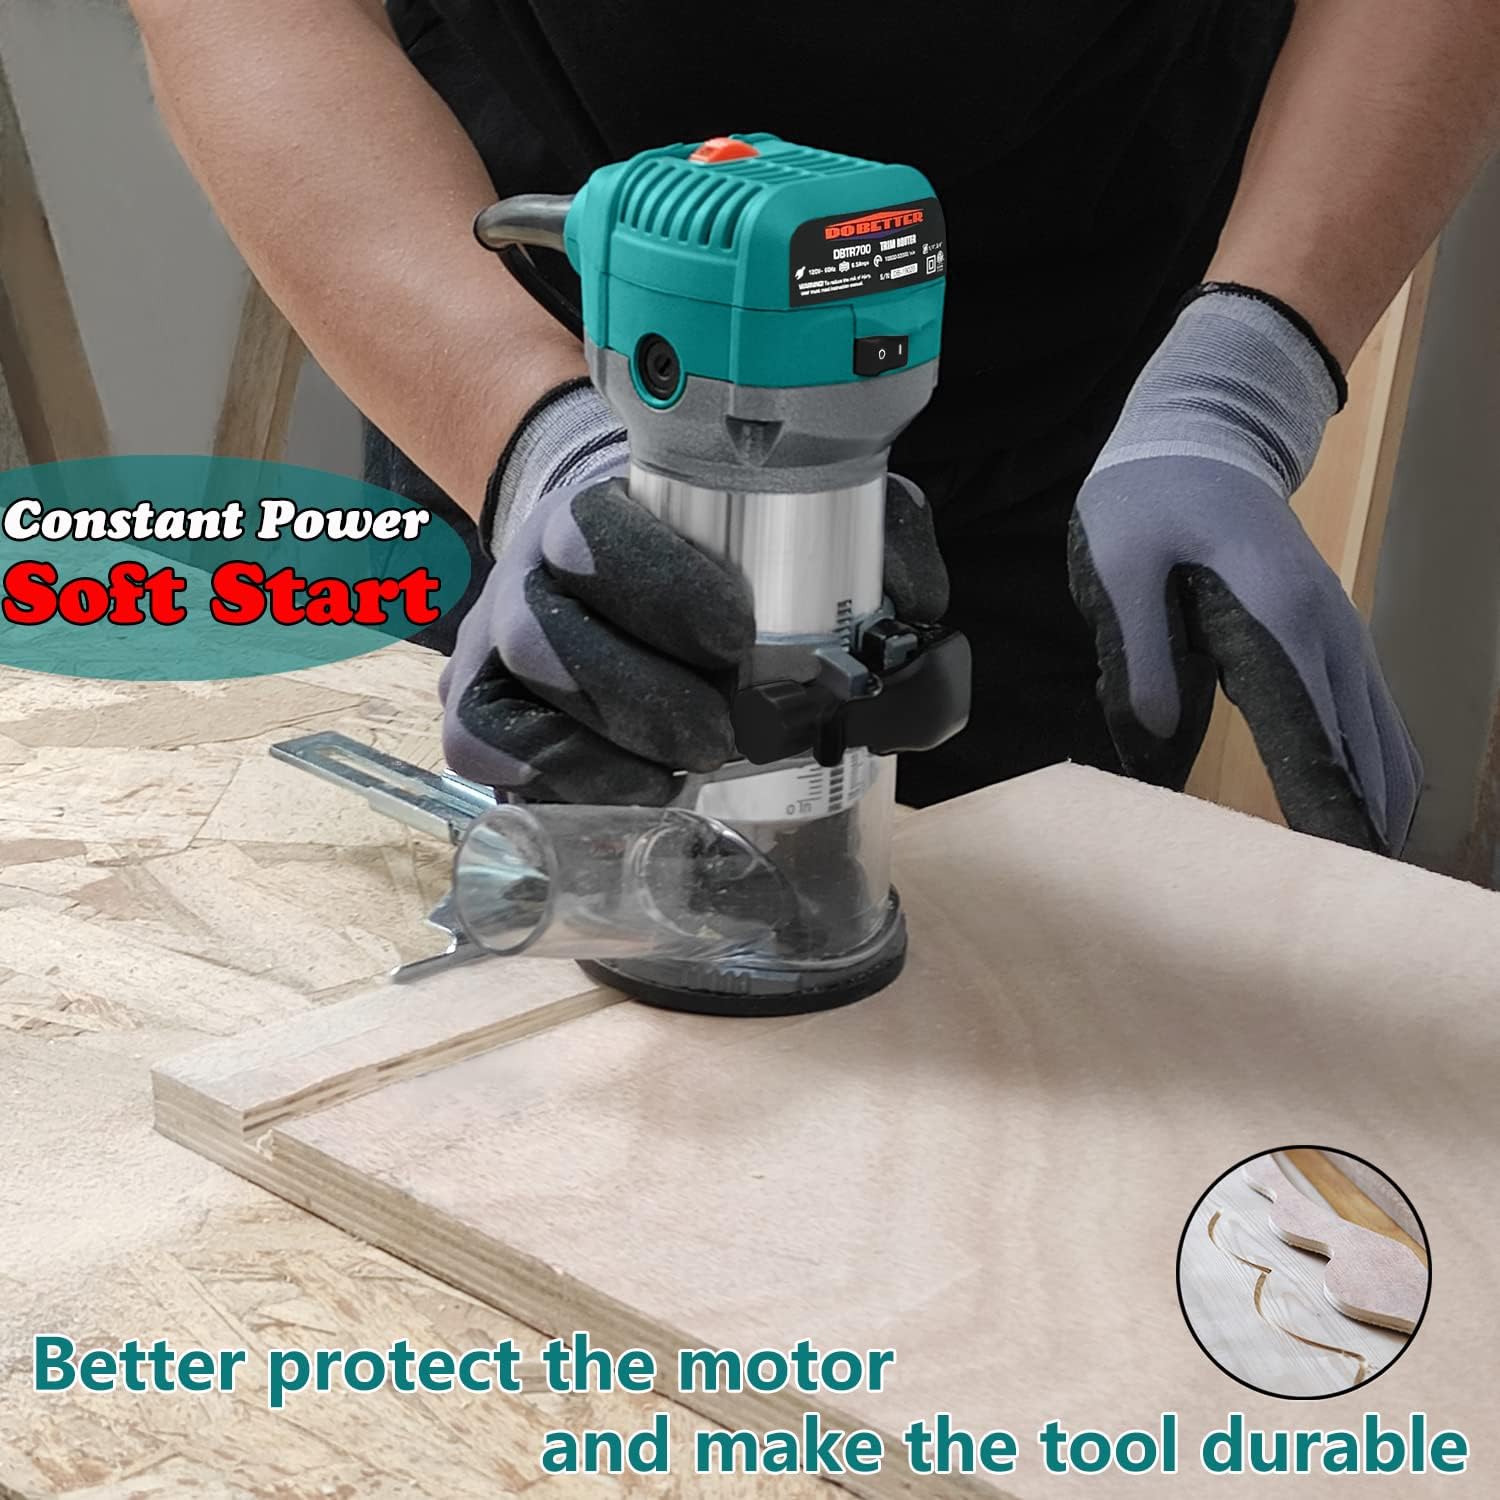 Dobetter 6.5-Amp Wood Router Tool, 1.25 HP Compact Trim Router with 6 Variable Speed, 12 Wood Router Bits, 1/4"